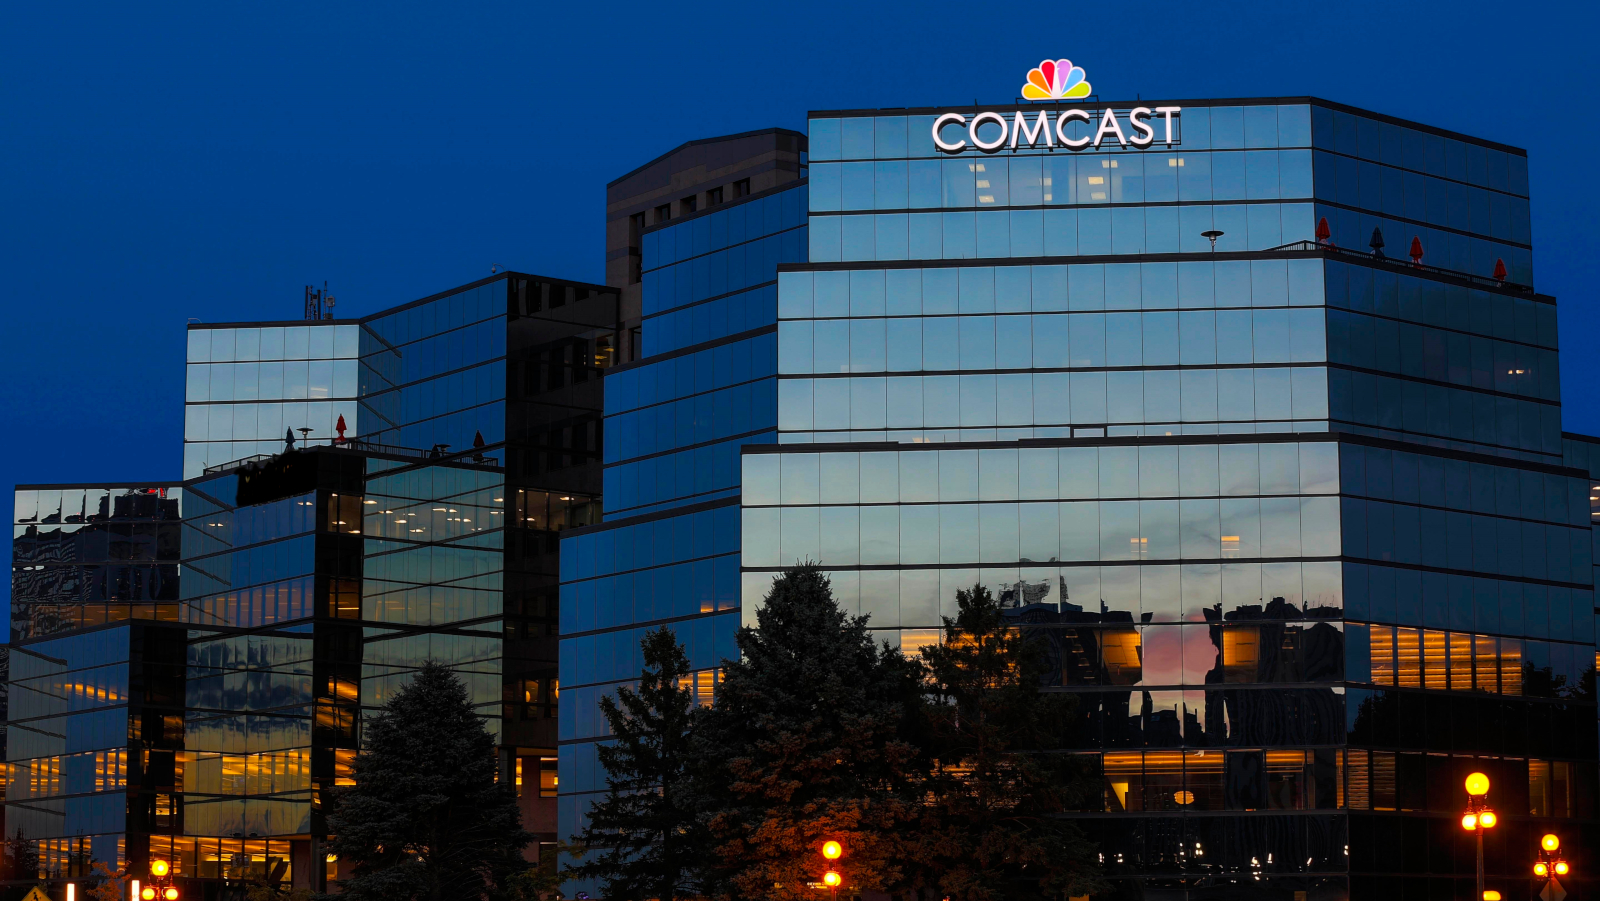 Exterior view of the Comcast Twin Cities Regional office at dusk.